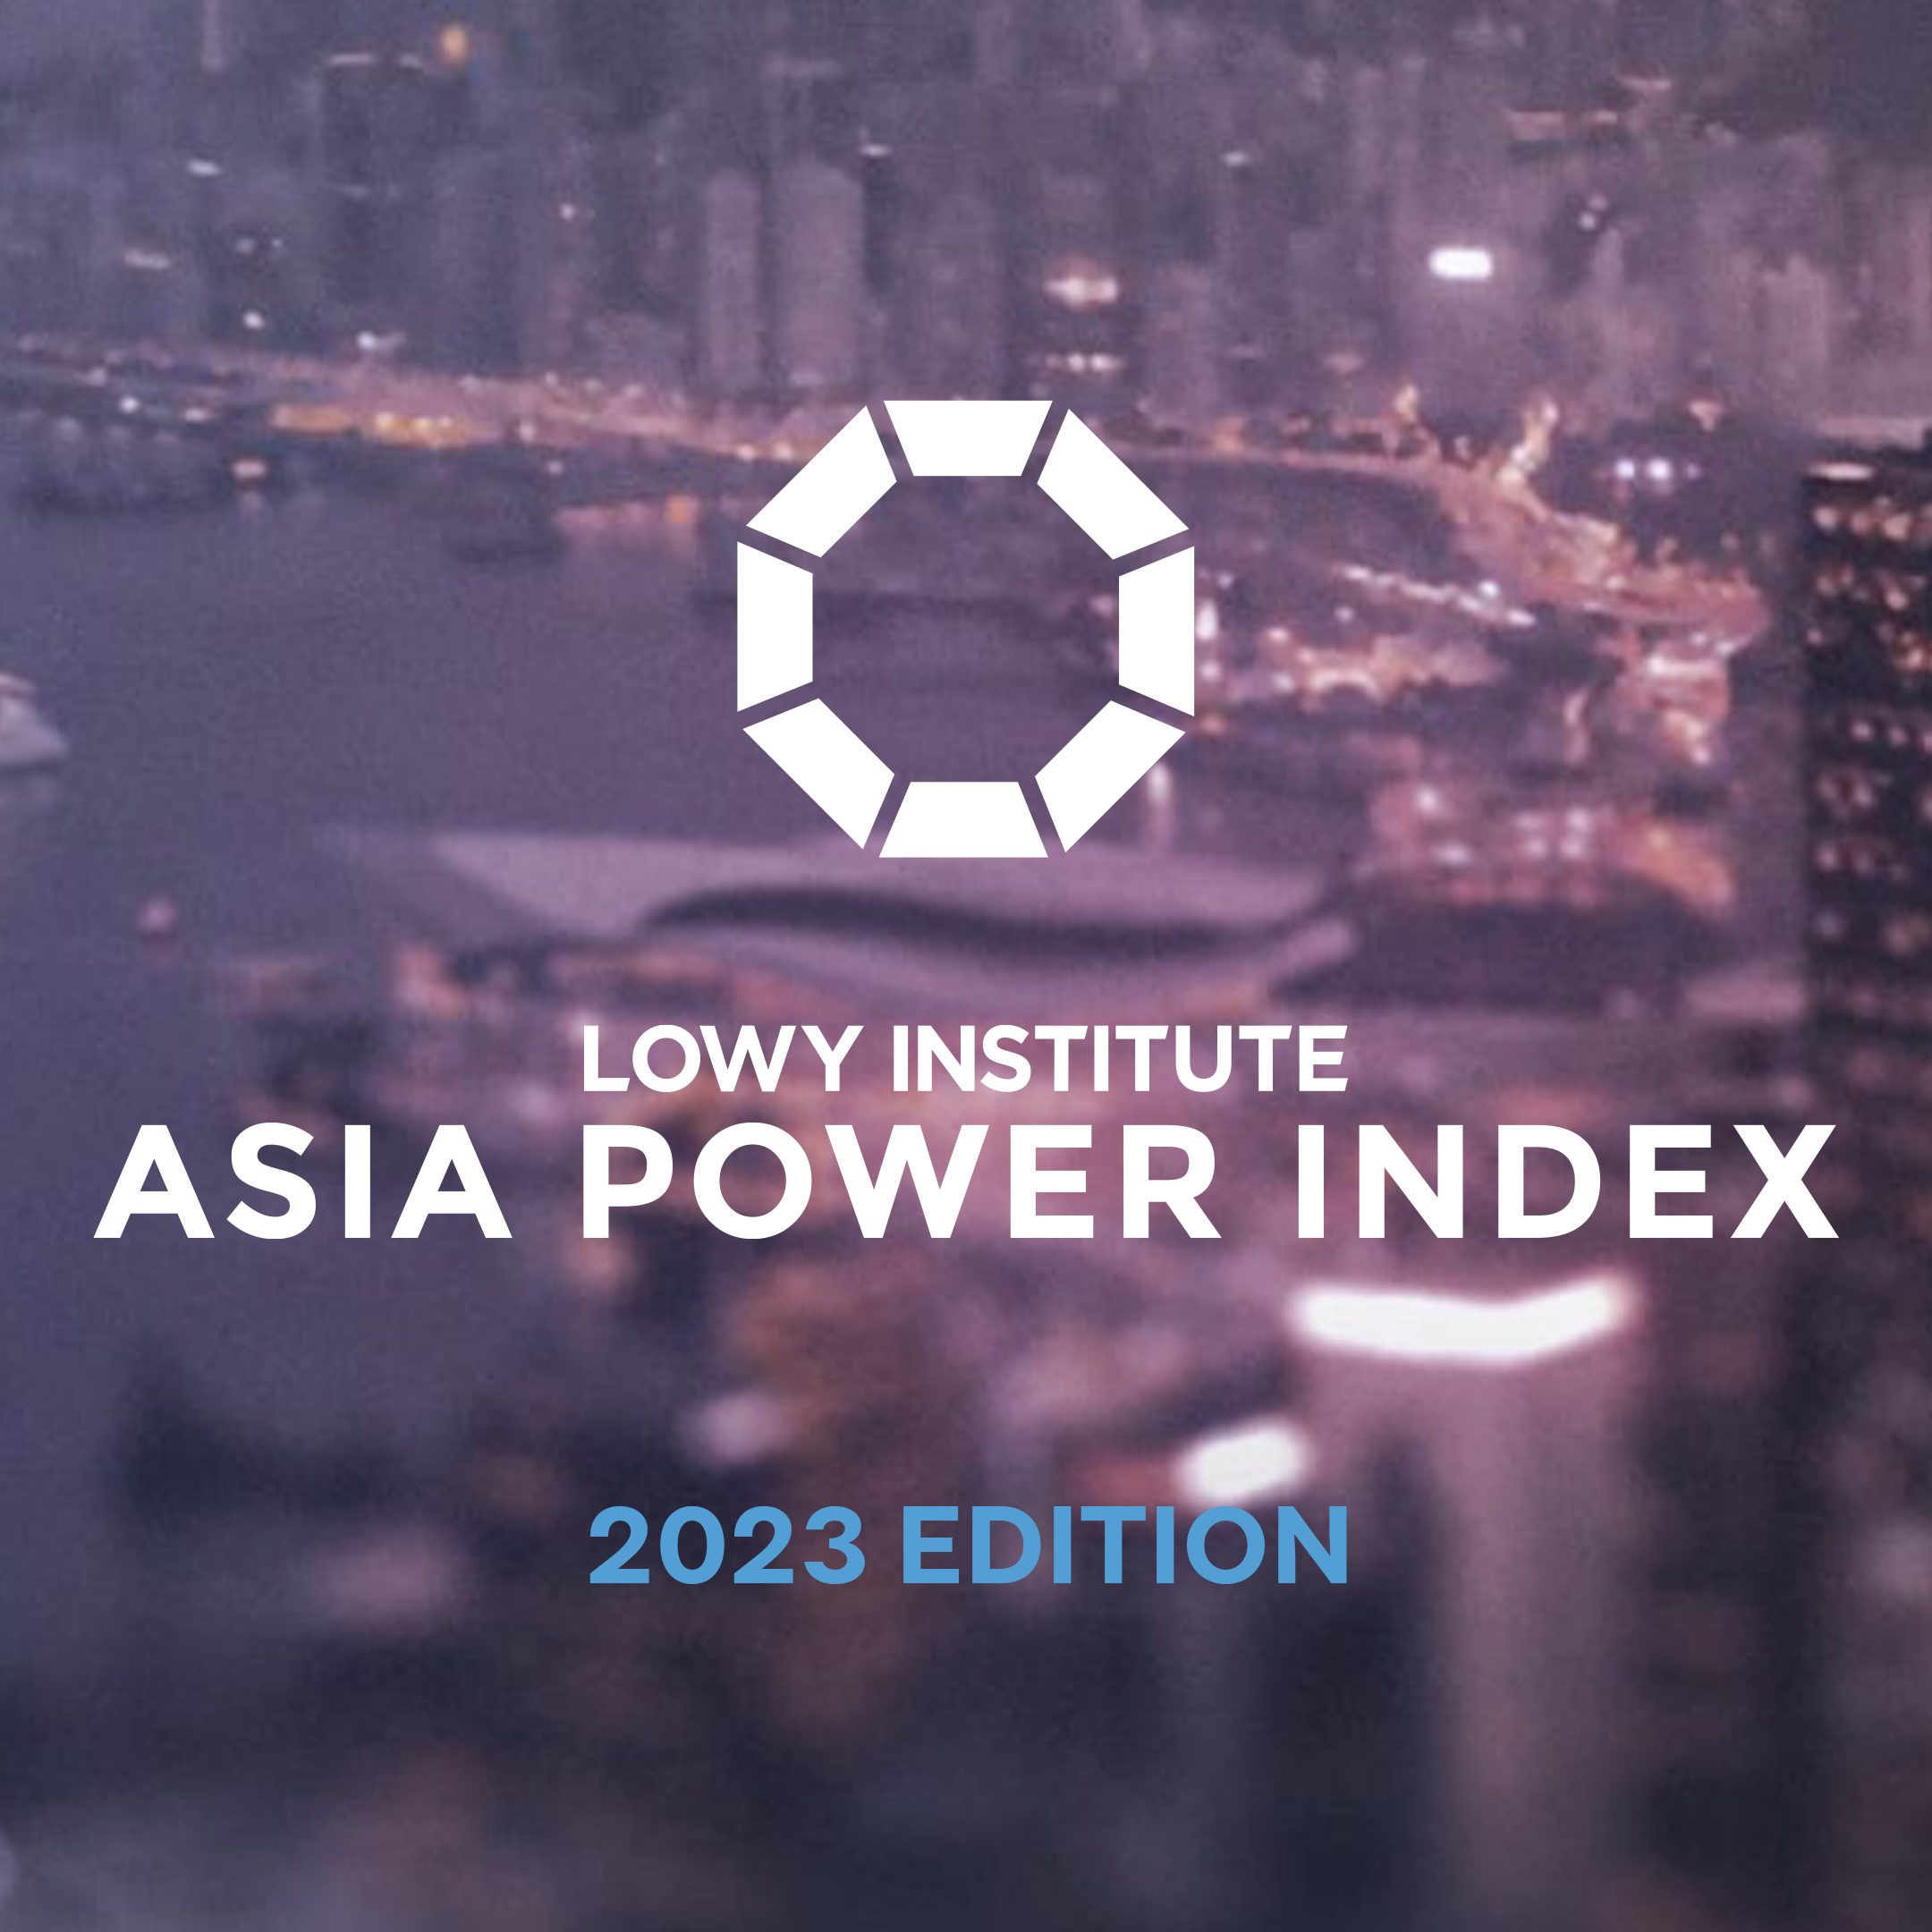 Launch of the Asia Power Index 2023